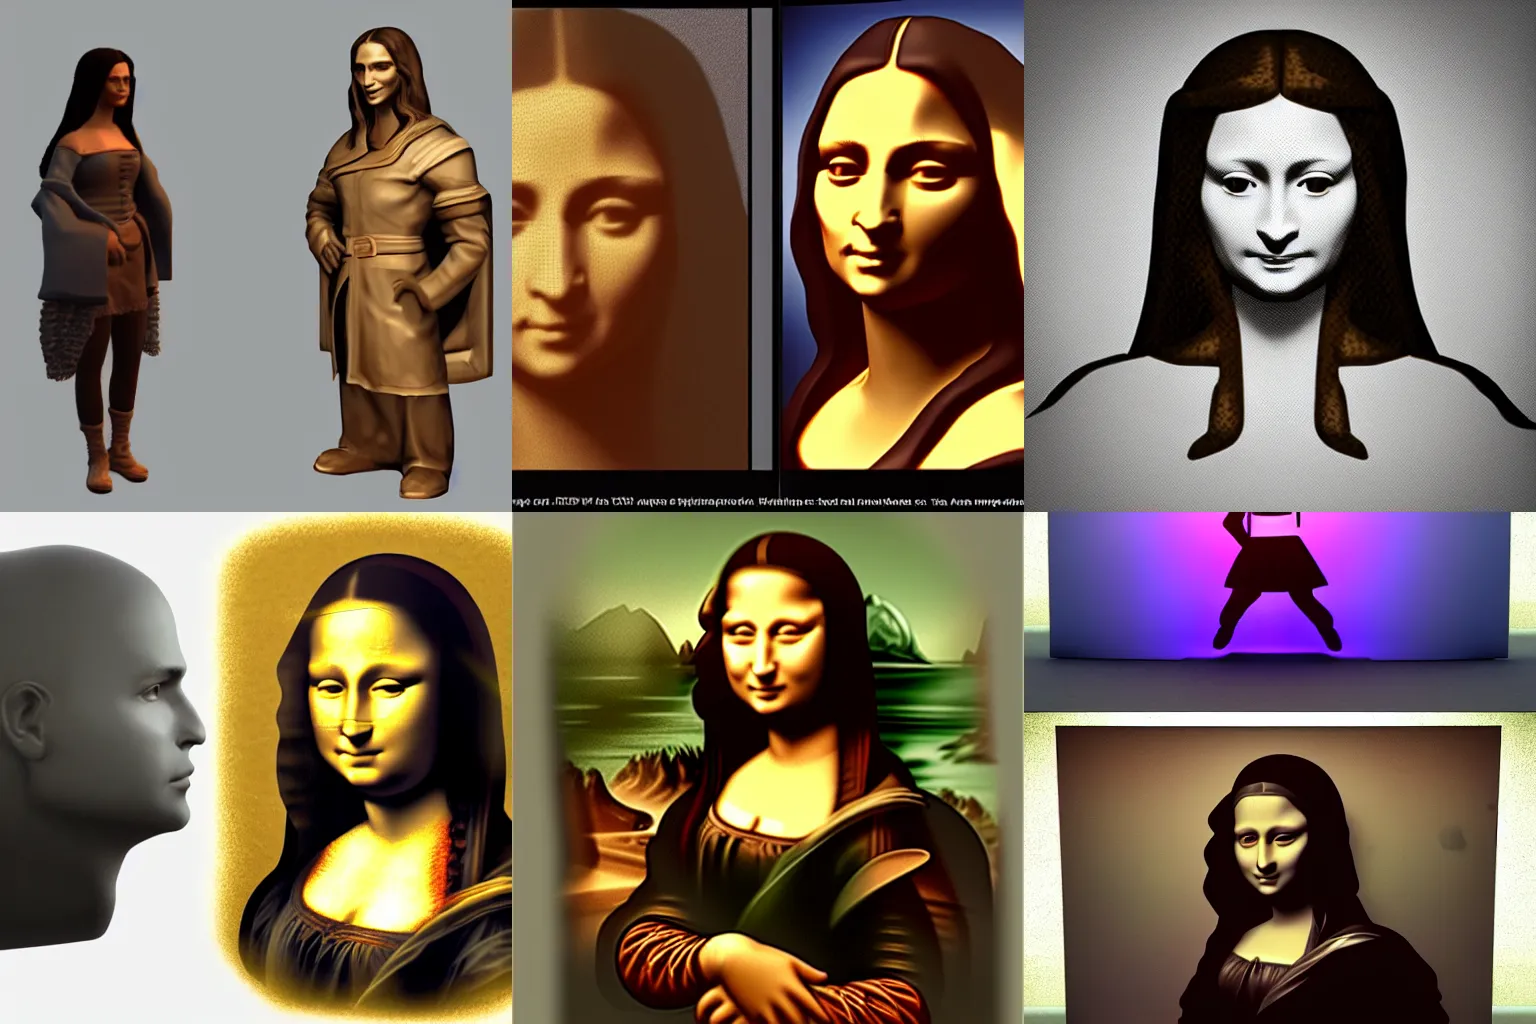 Prompt: 3 d model of a character in a video game, 3 d model of a character in a video game, light and shadow effects, art station, atmospheric lighting, looks like ( mona lisa )